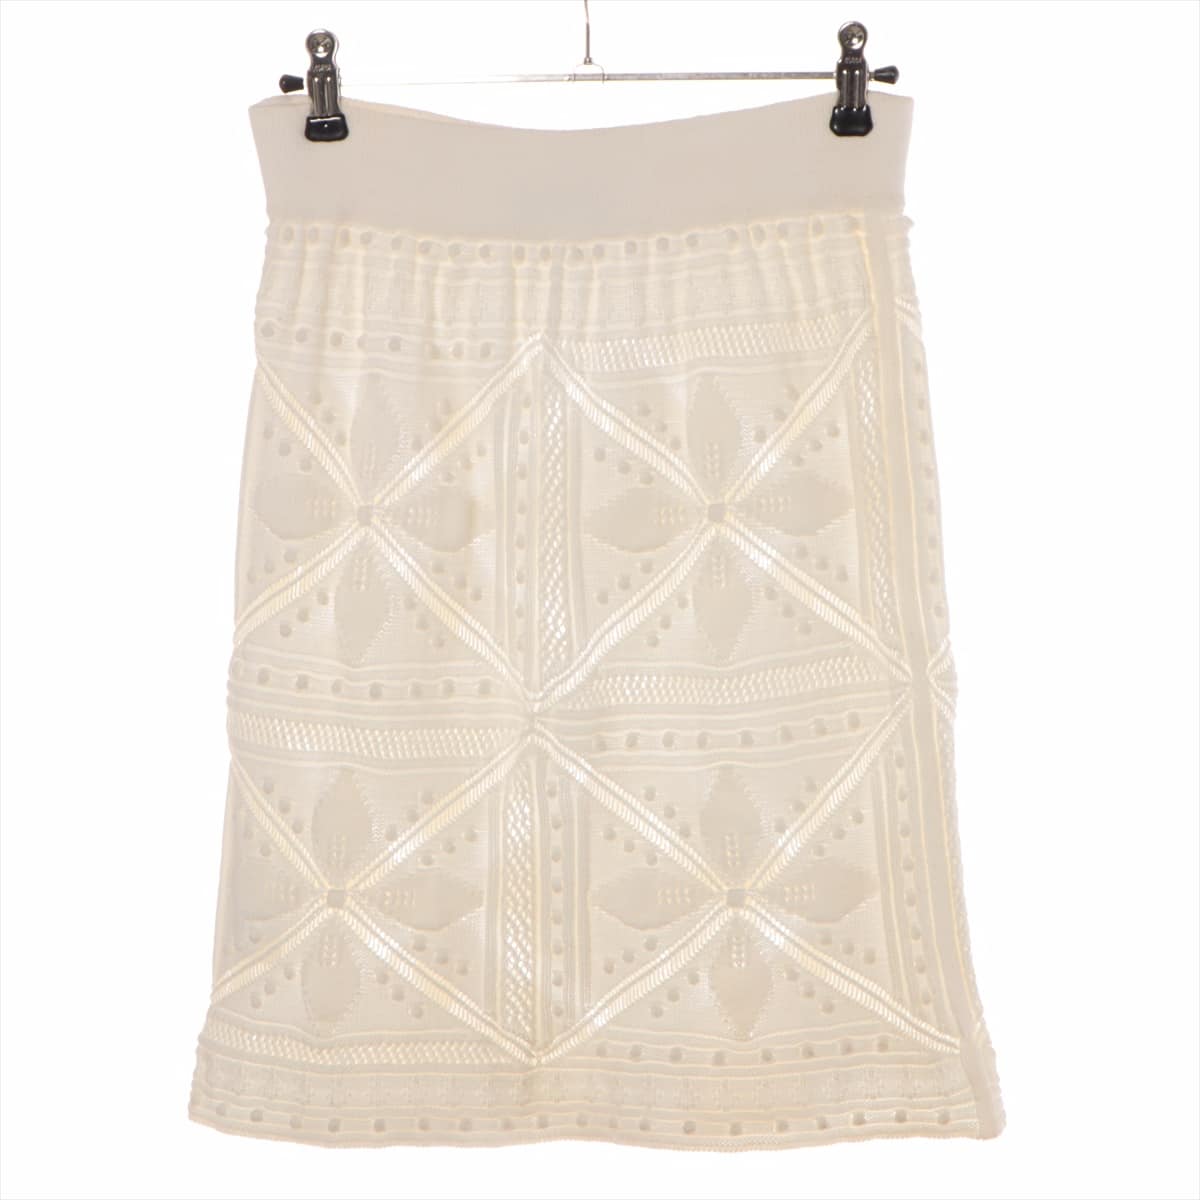 Chanel Cotton Knit Skirt Unknown size Ladies' Ivory